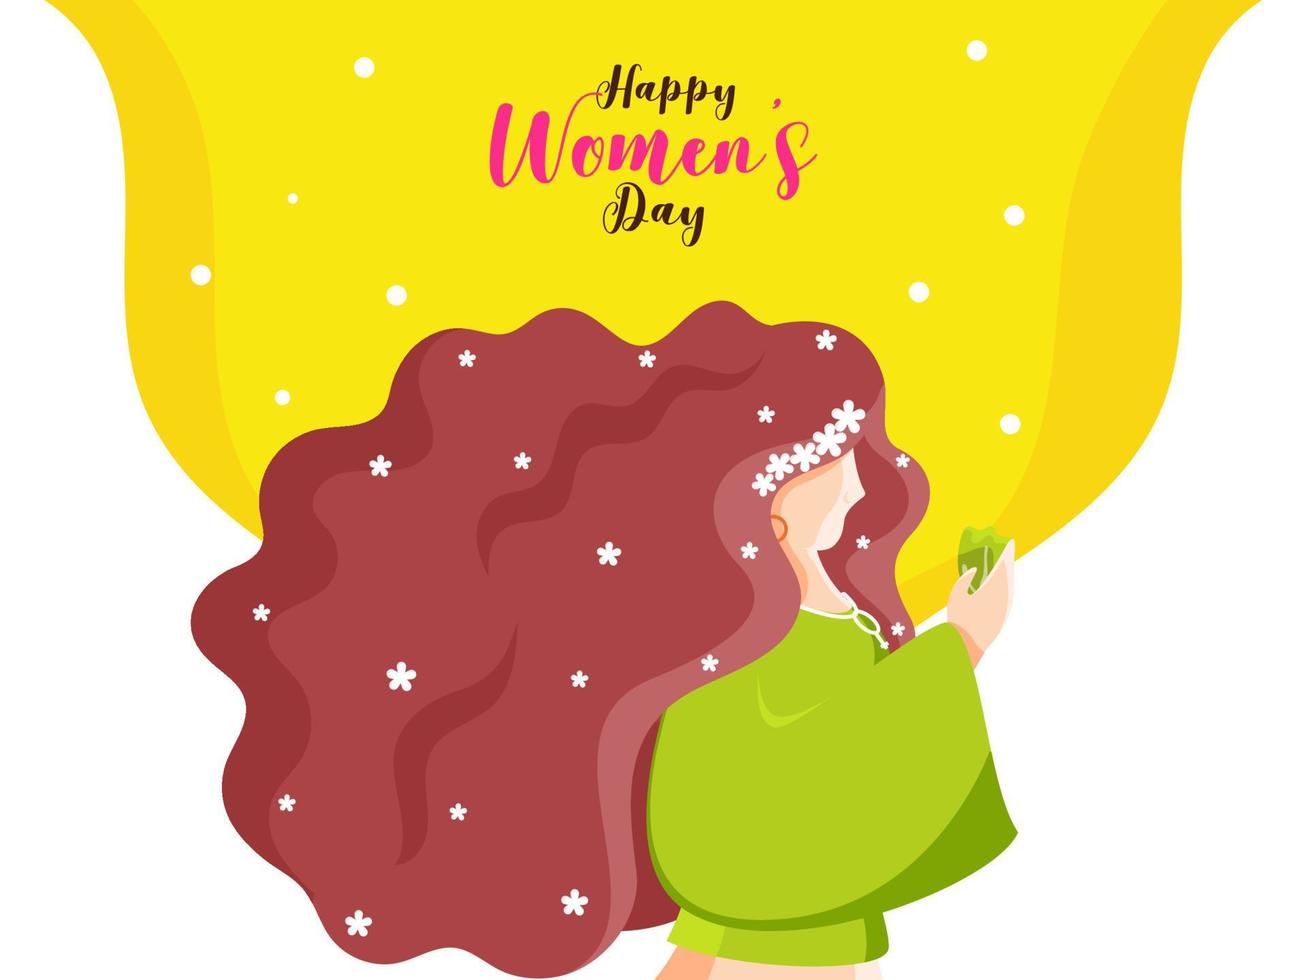 Happy Women's Day Celebration with Cartoon Young Girl holding Flower Bud on Yellow and White Background. vector